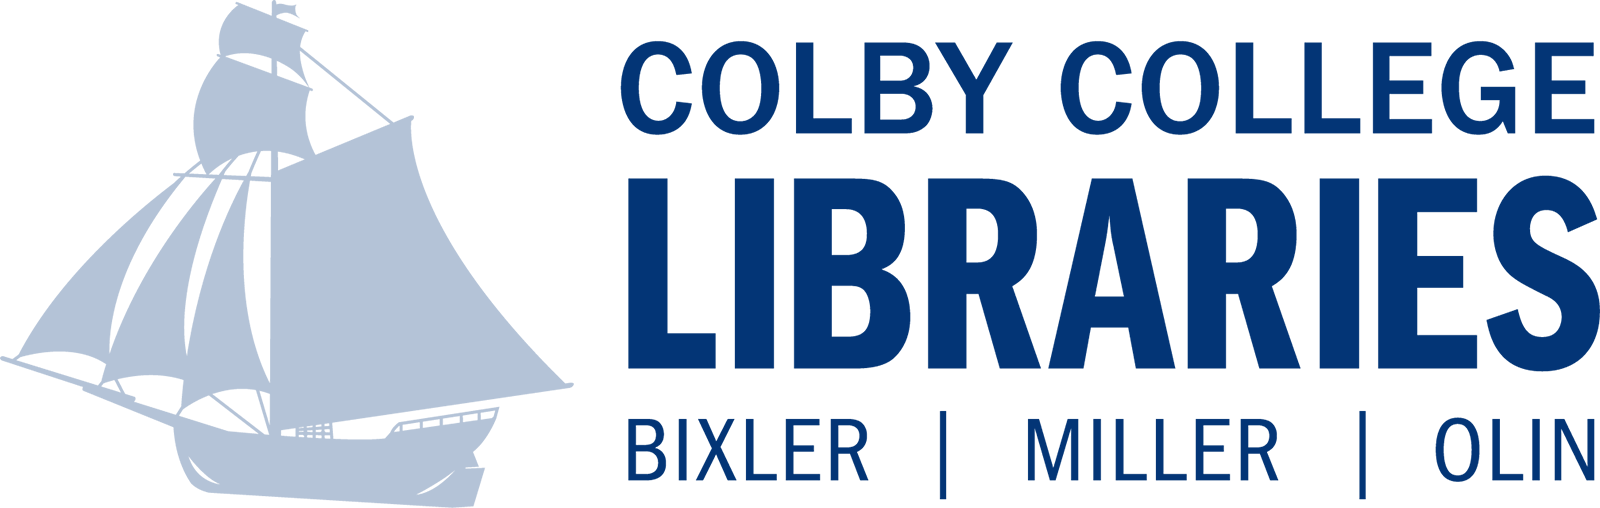 Colby College Logo - Colby College Libraries | Colby College